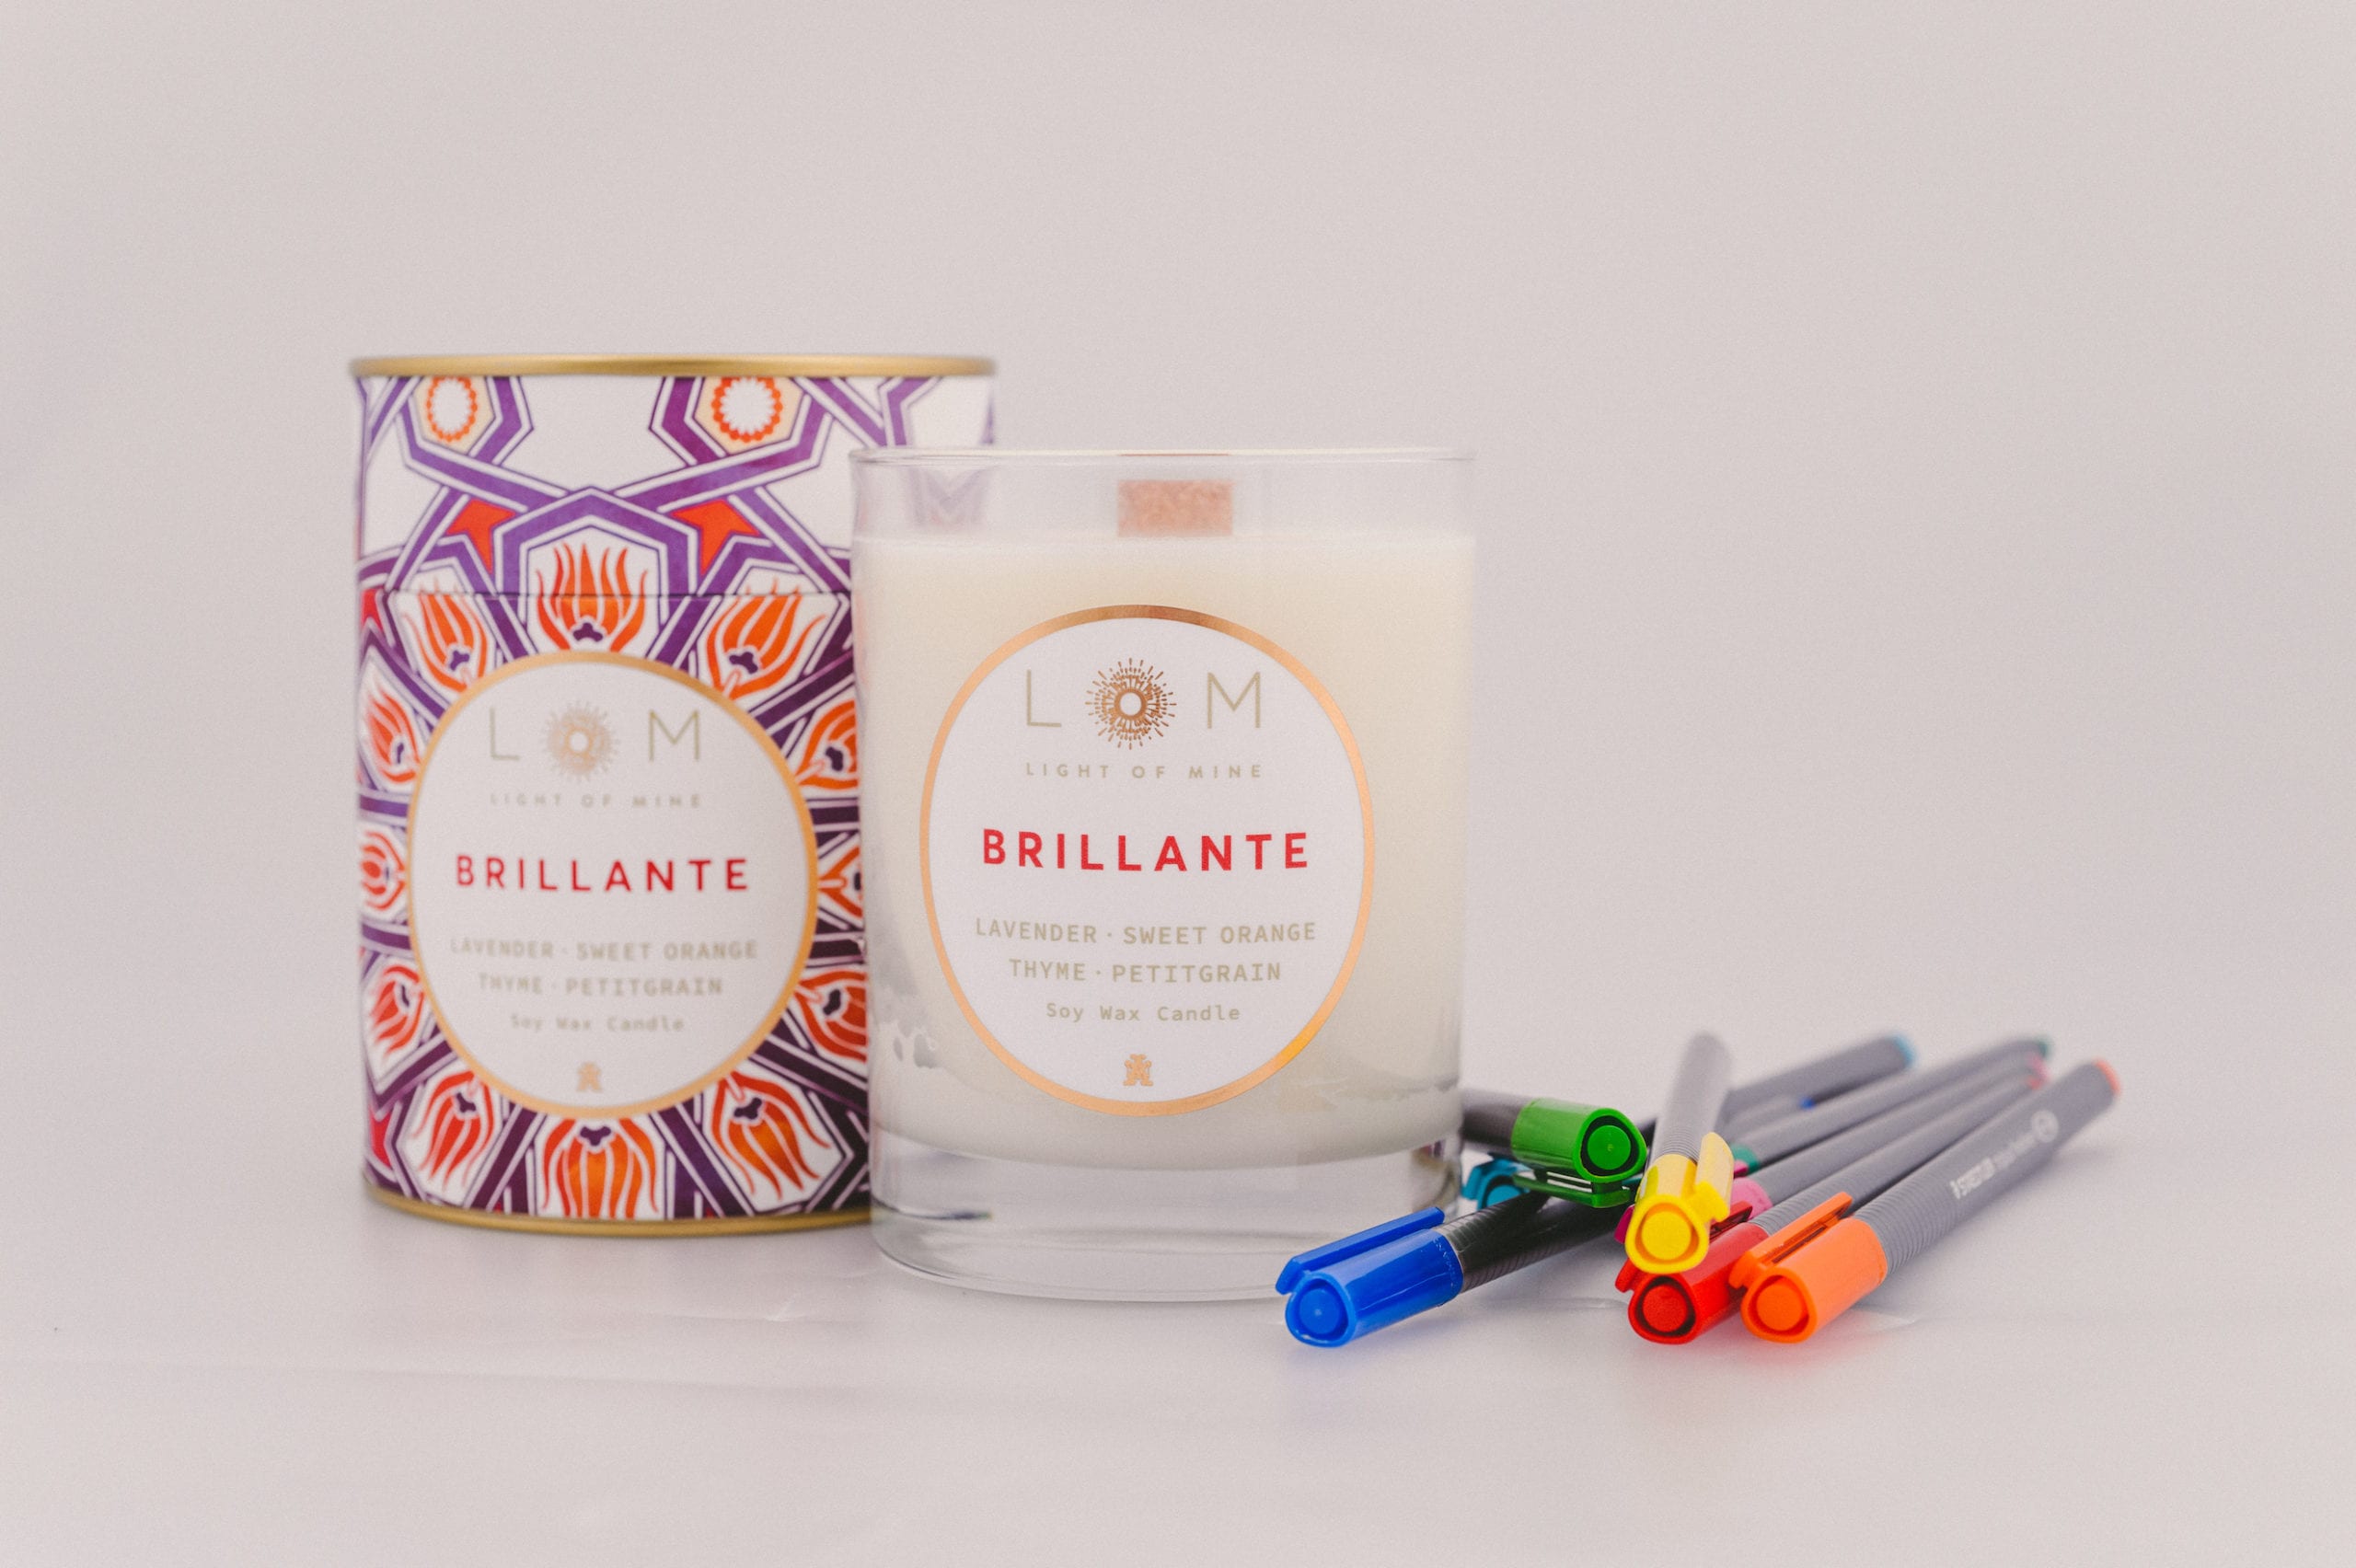 Two Light of Mine Brillante brand with Lavender, Sweet Orange, Thyme and Petitgrain soy wax scented candles with different colored markers nearby